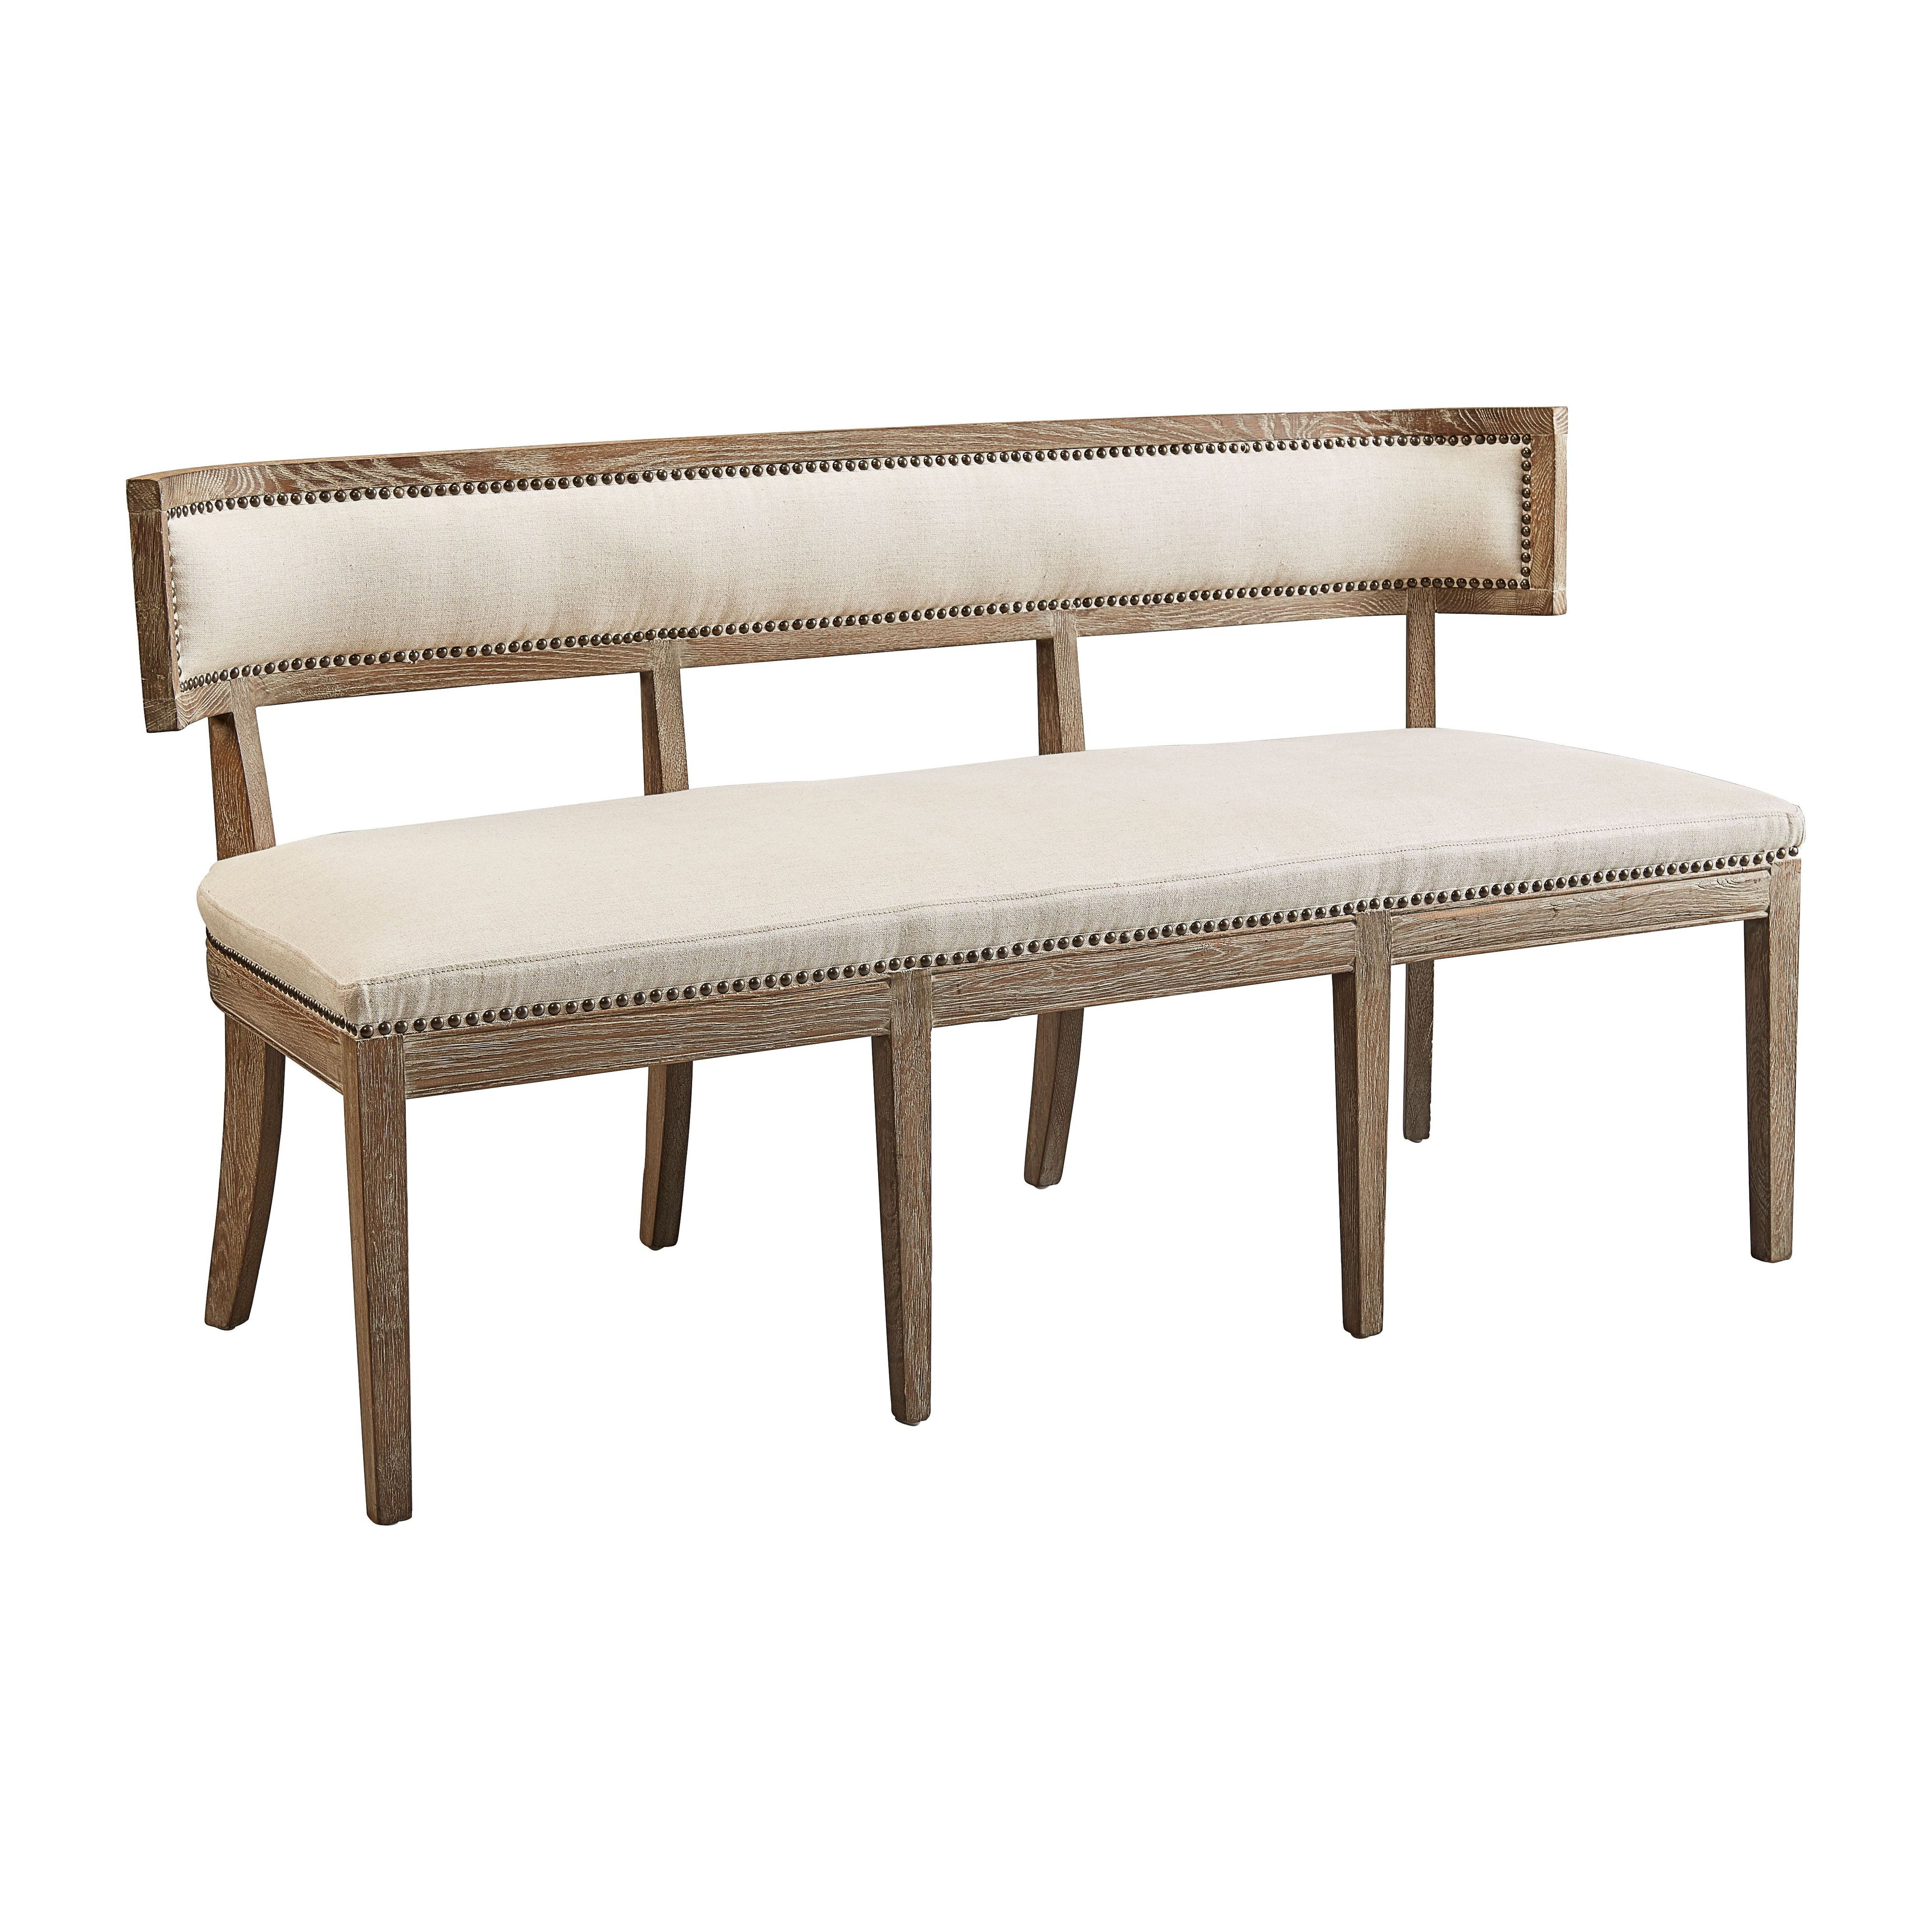 Linen Banquette Bench, Andalucia Modern White Leather Bench Large 60 Inch